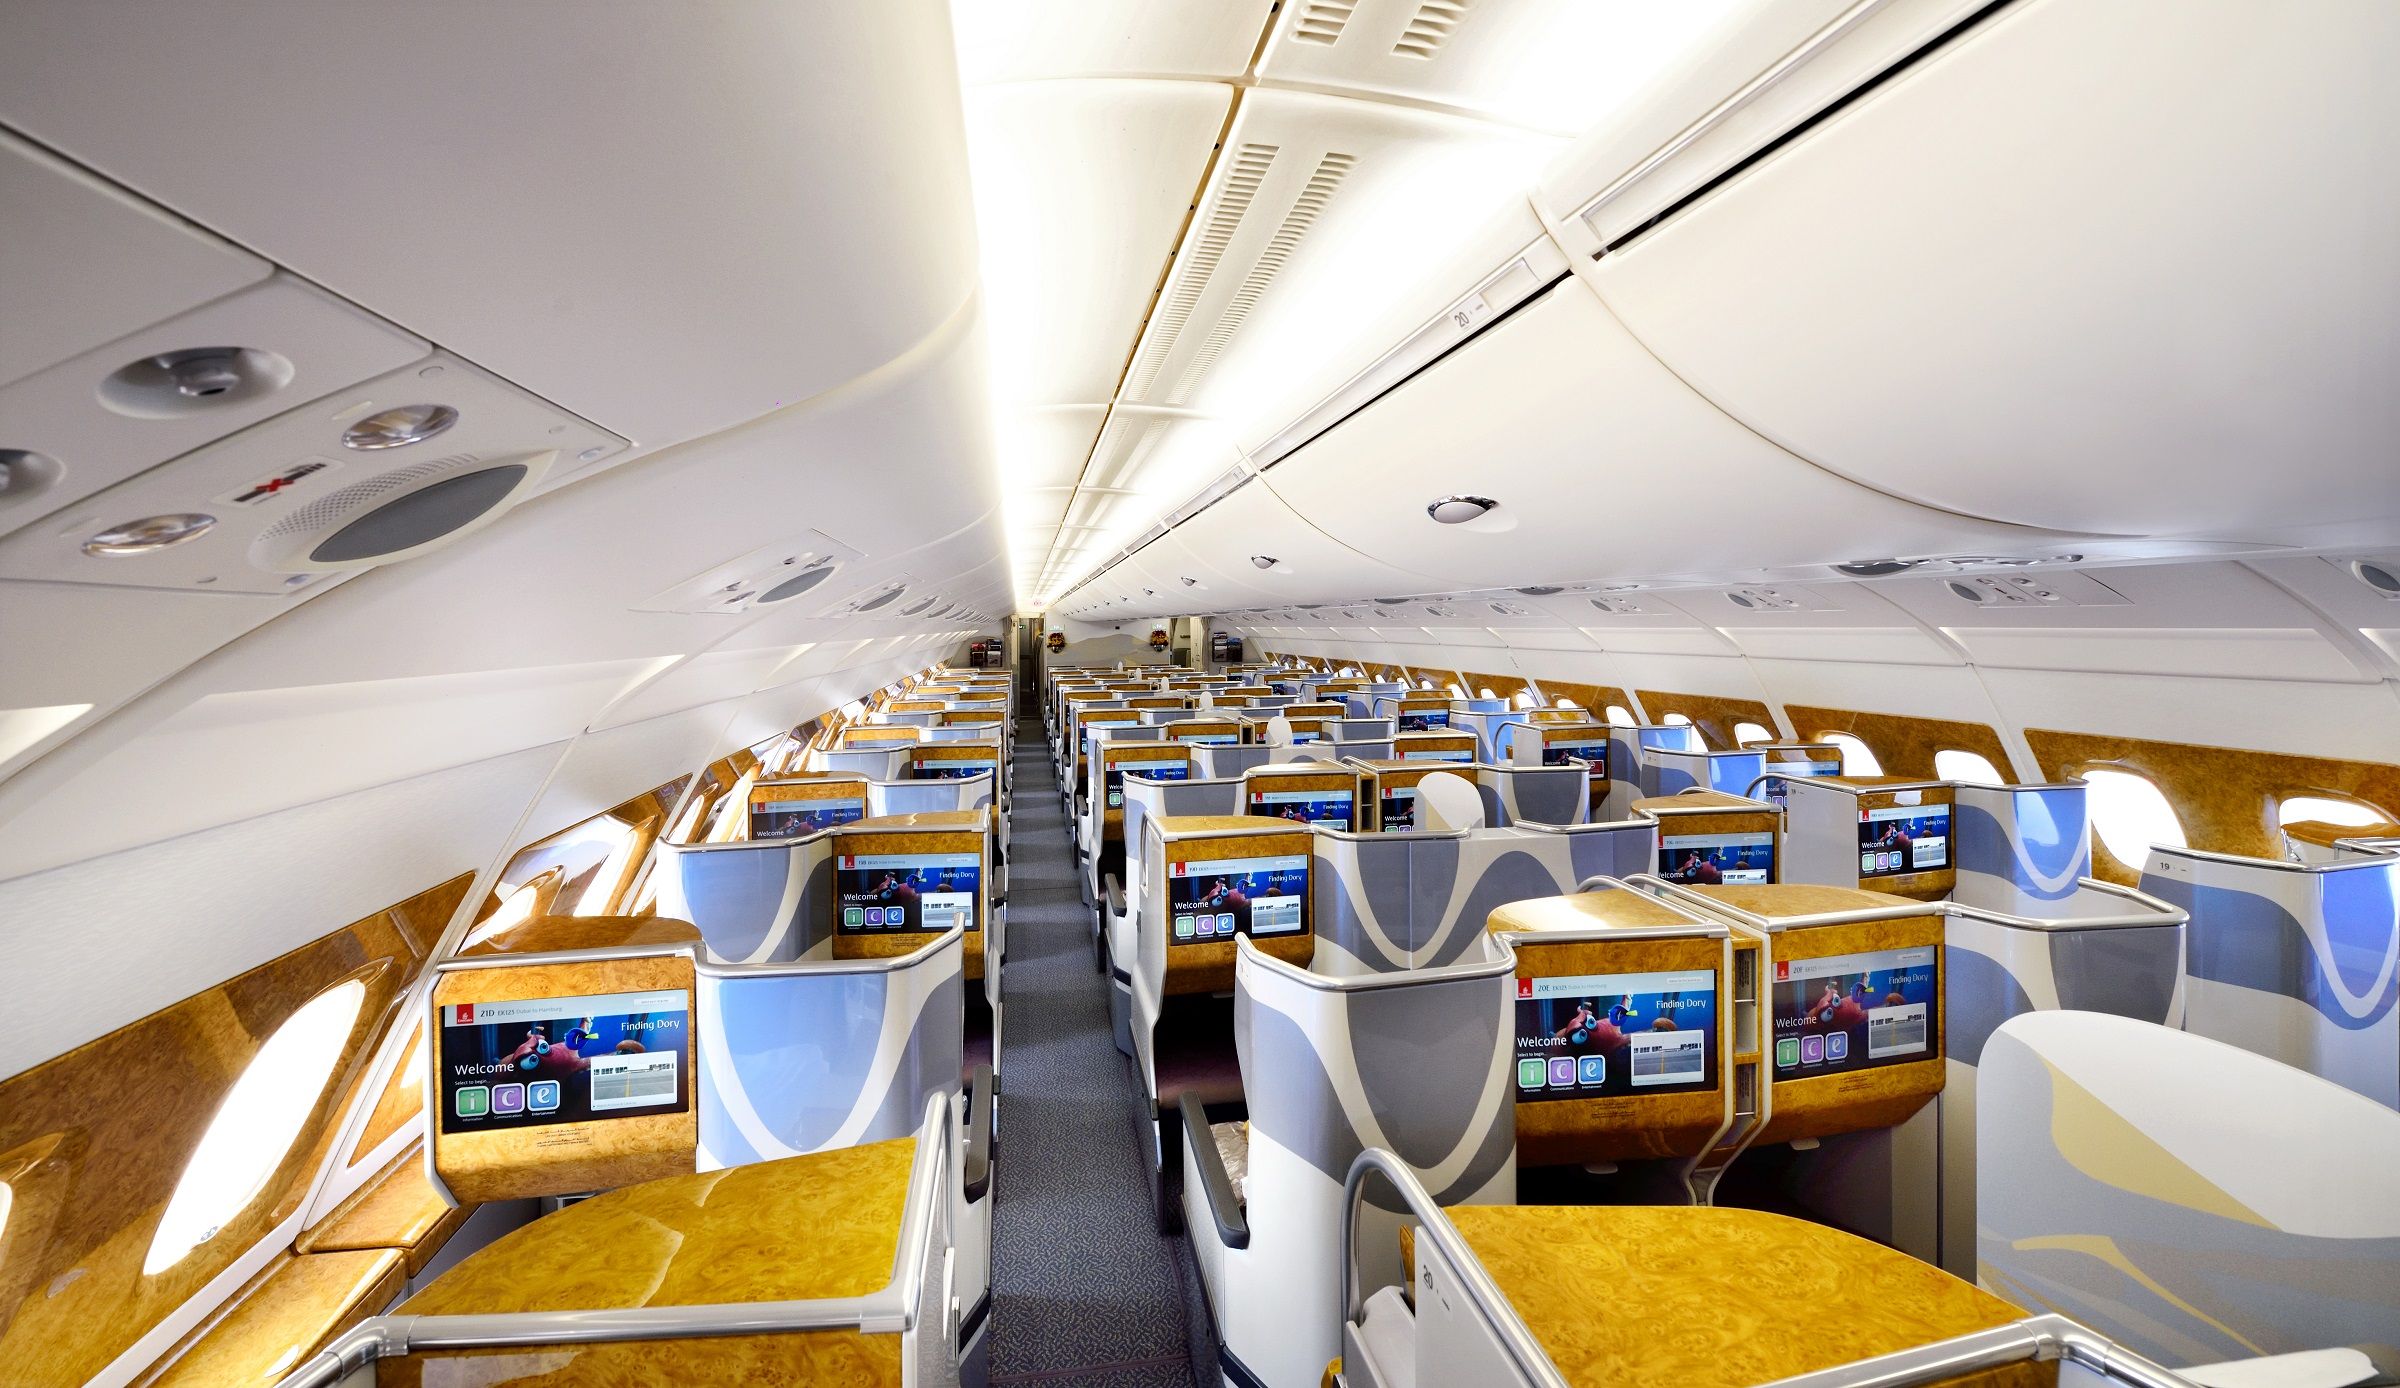 Inside The Emirates Airbus A380 Business Class Cabin.